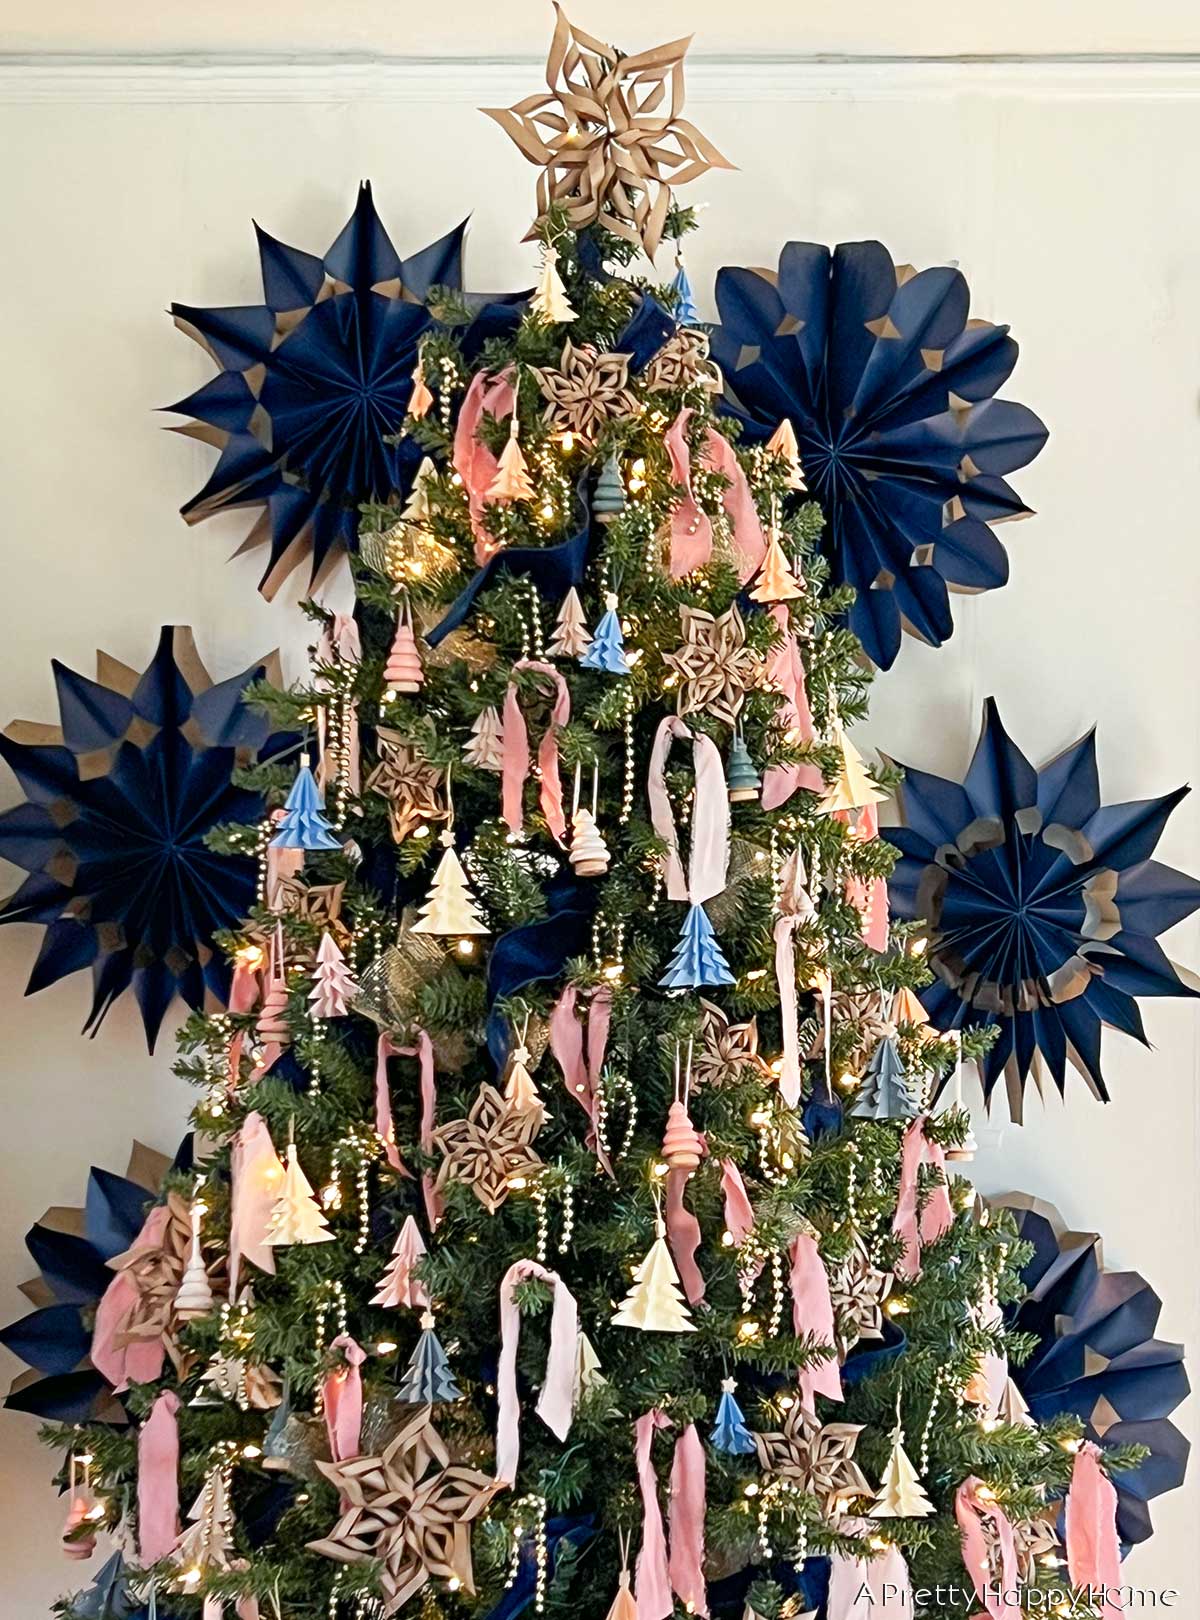 pink and navy christmas tree with handmade origami ornaments, paper snowflakes, and mini wood trees set against a backdrop of giant snowflakes made from blue gift bags